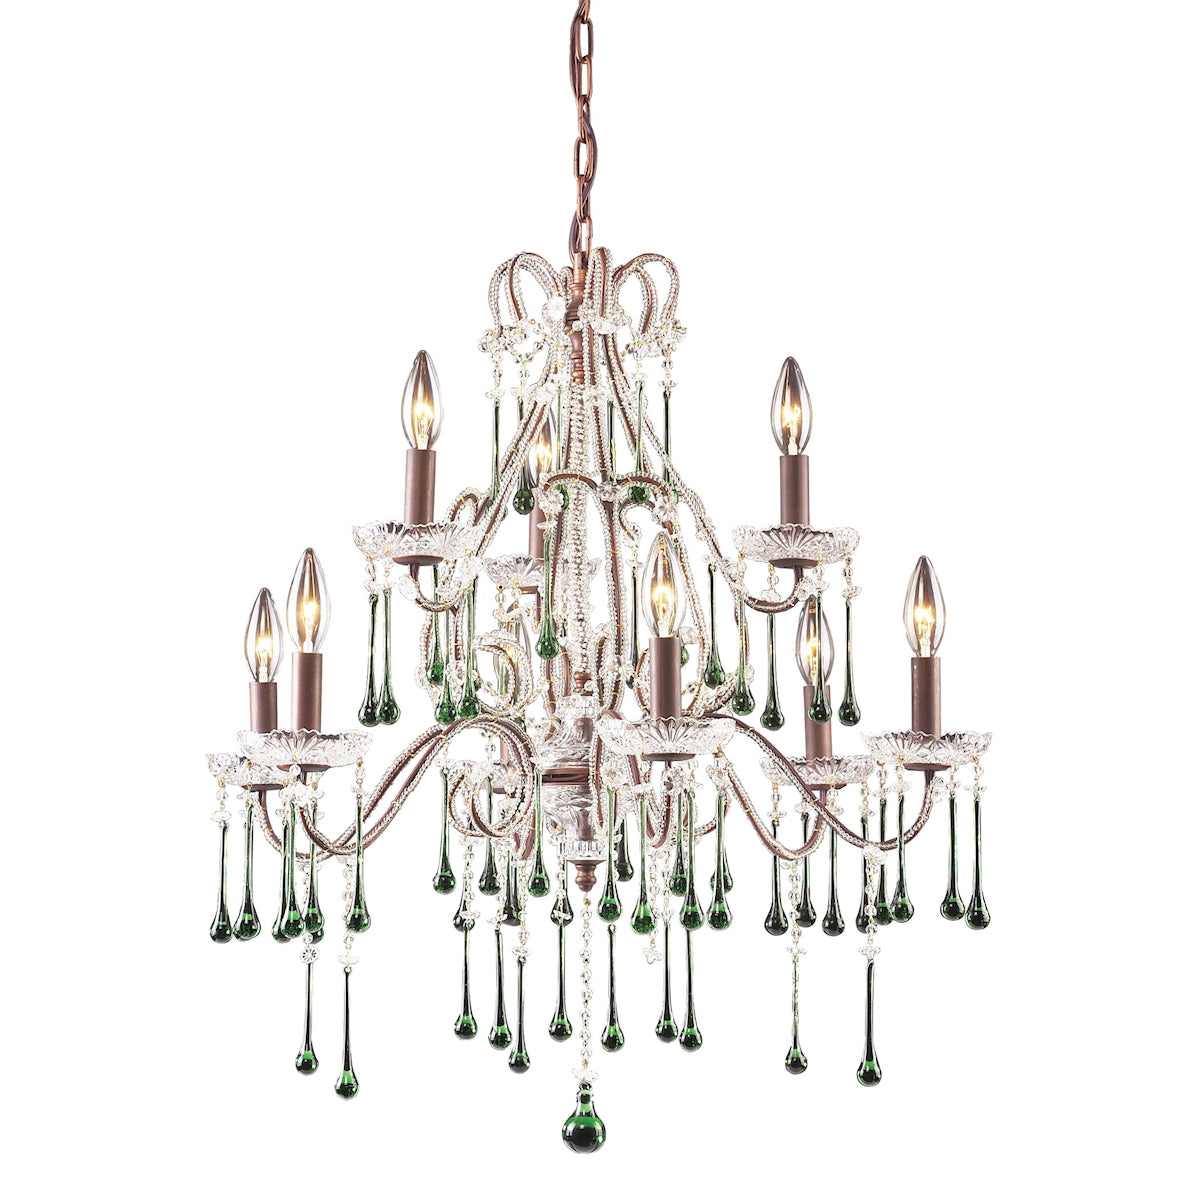 ELK Lighting 4013/6+3LM Opulence 9-Light Chandelier in Rust with Lime Crystals